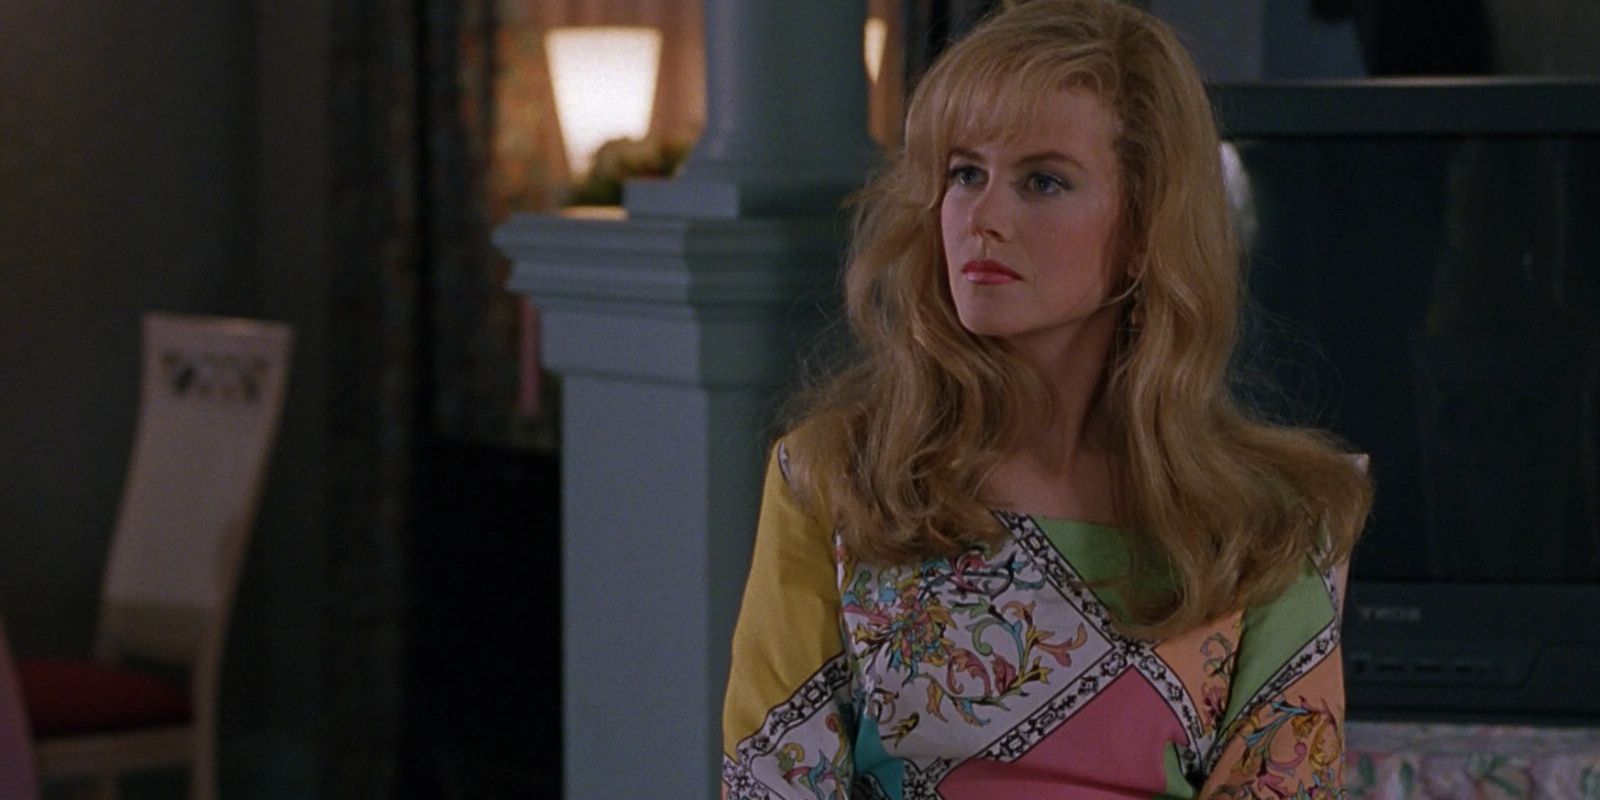 Nicole Kidman as Suzanne Stone, looking angry and wearing a colorful dress in To Die For